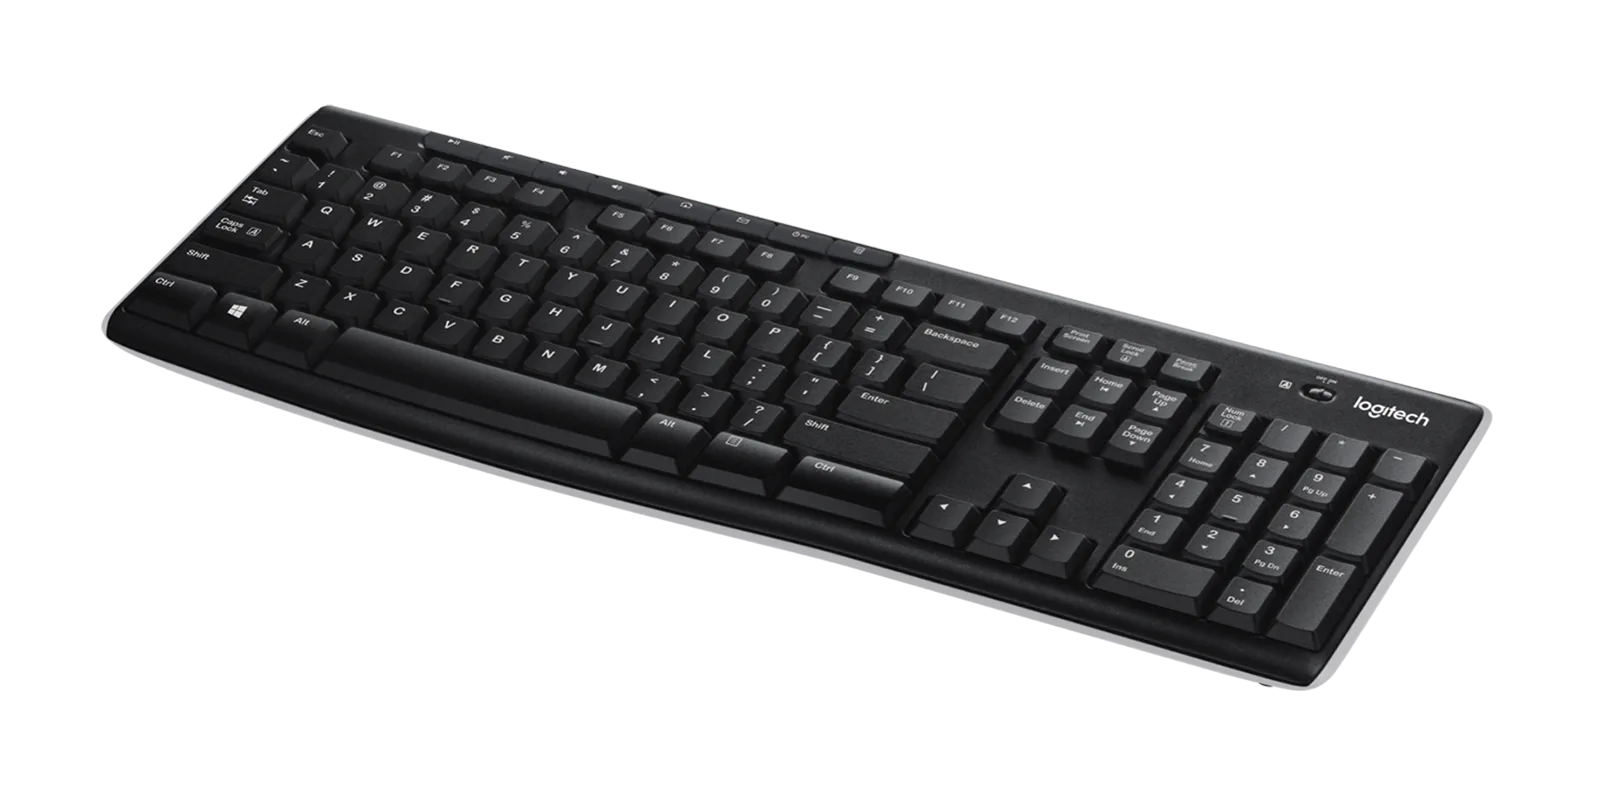 Logitech K270 Wireless Keyboard for Windows, 2.4 GHz Wireless, Full-Size, Number Pad, 8 Multimedia Keys, 2-Year Battery Life, Compatible with PC, Laptop